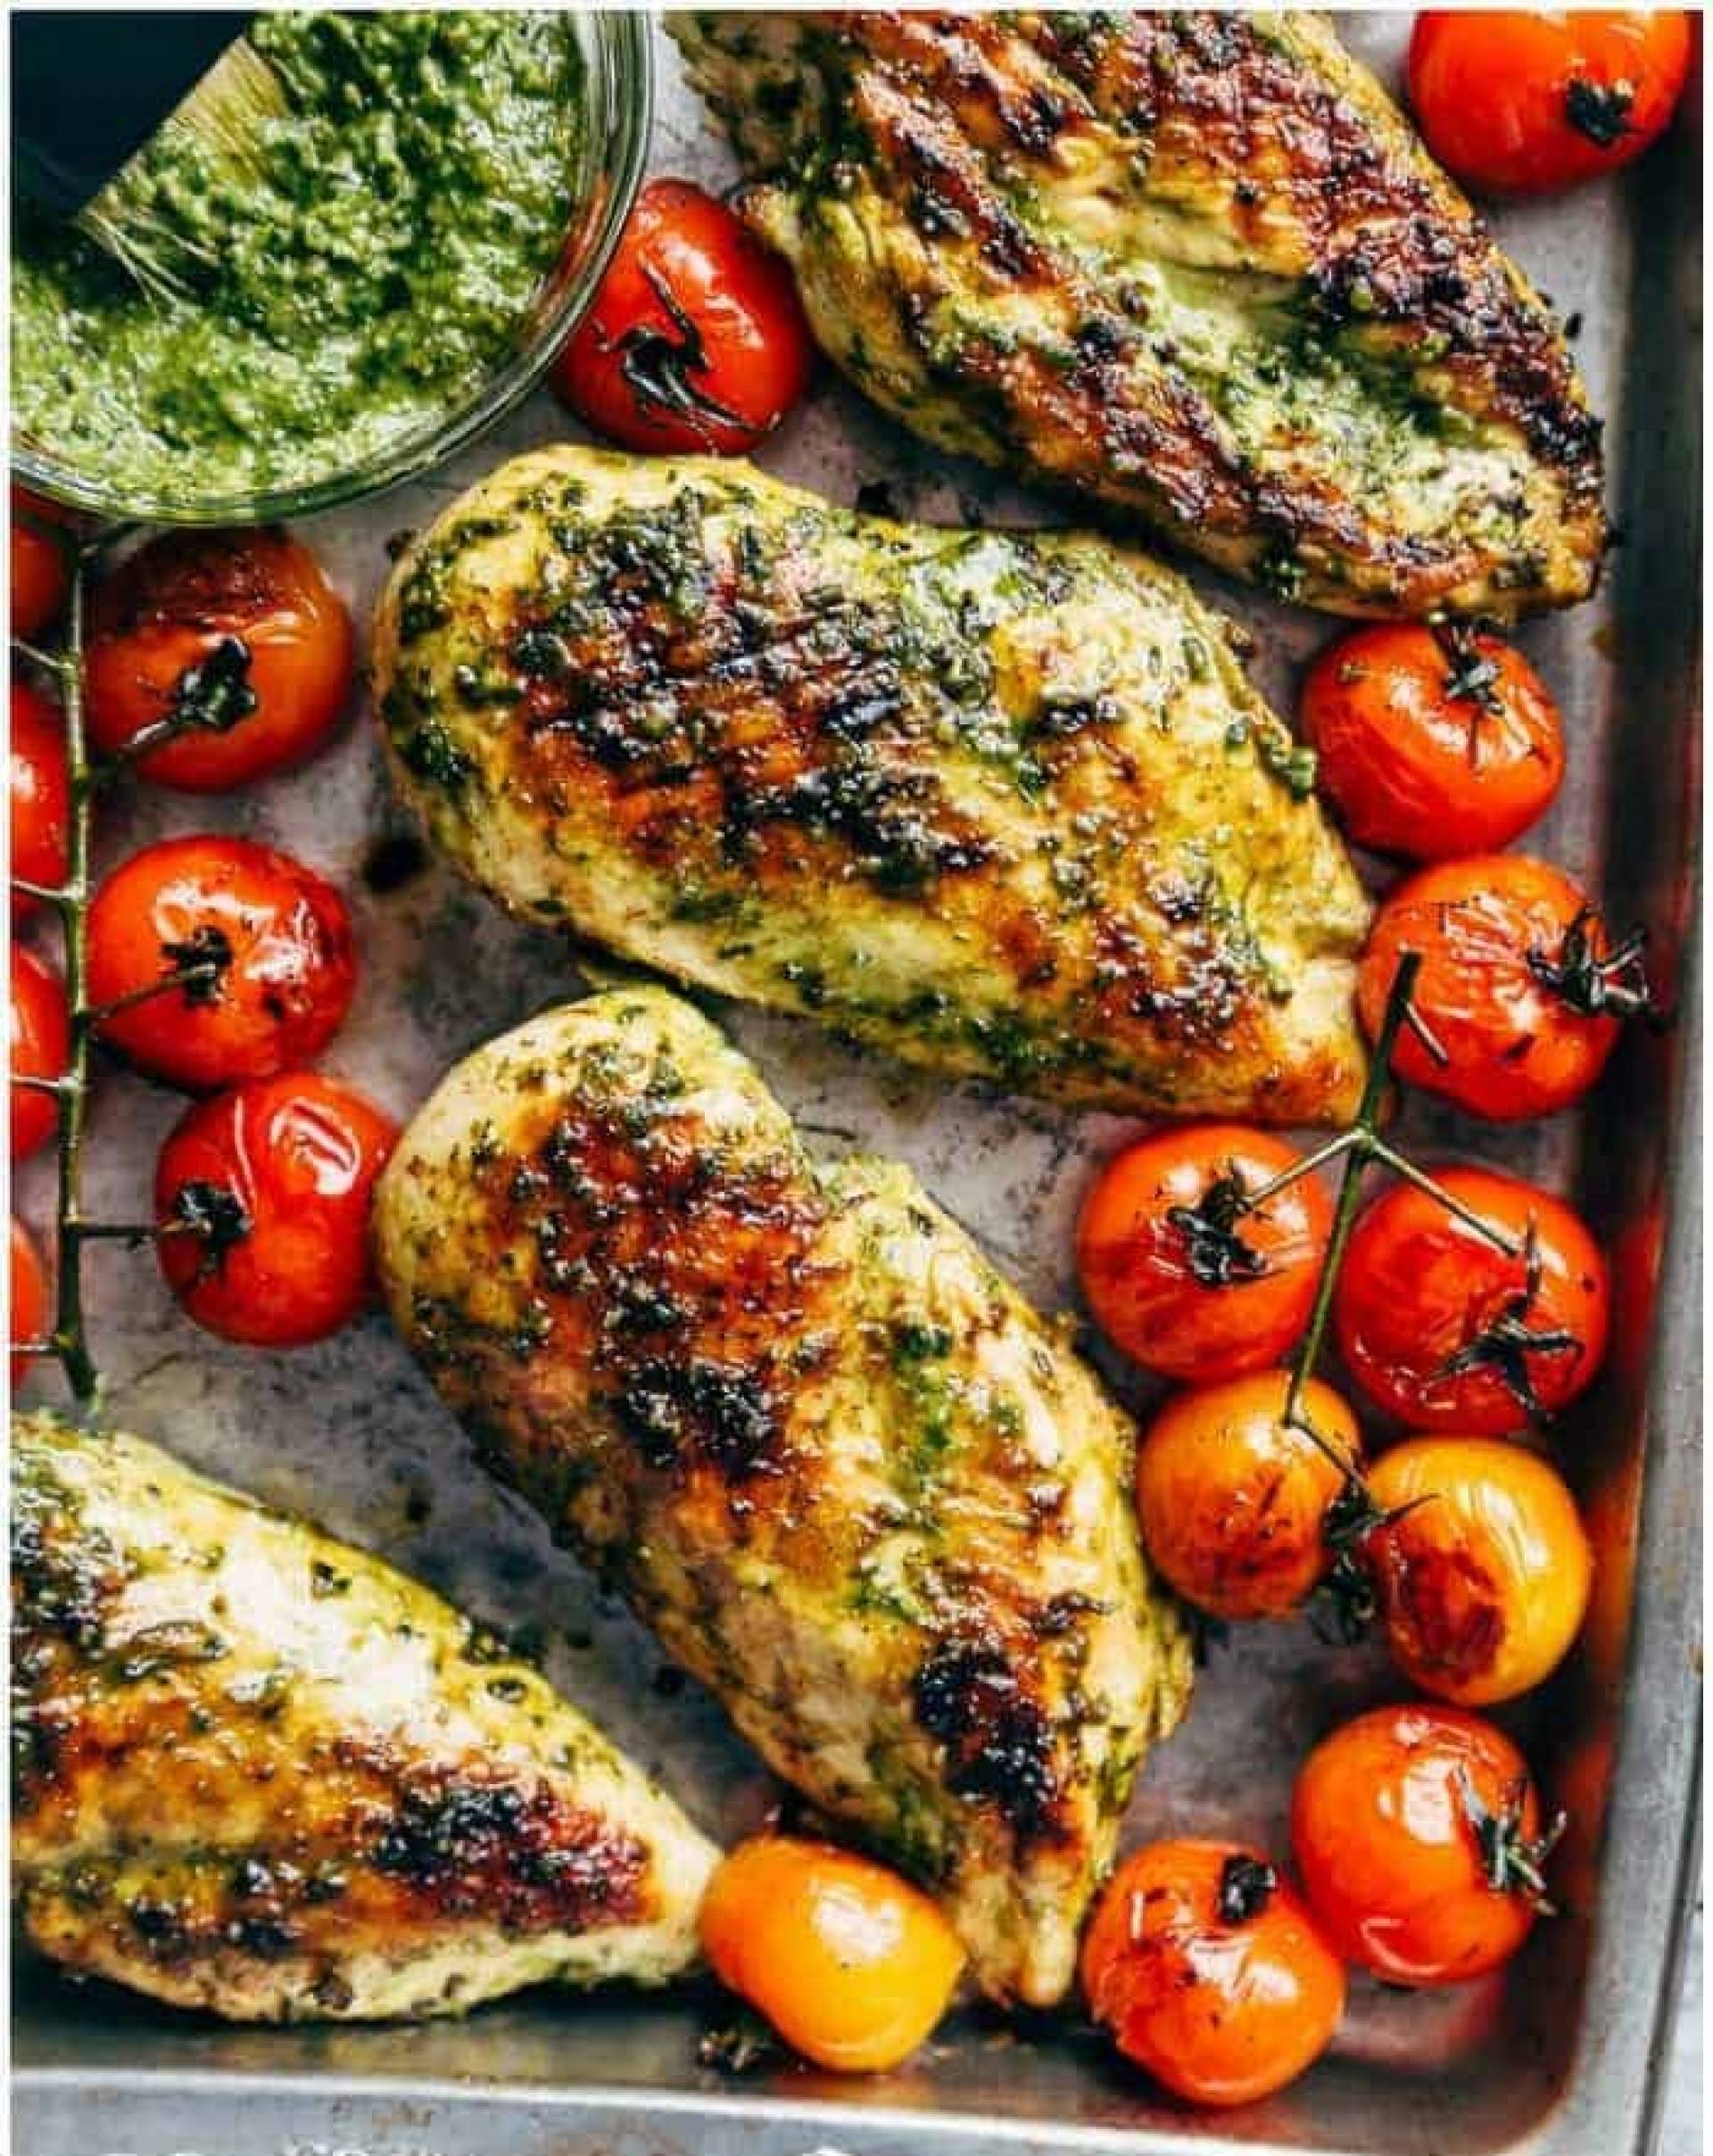 Pesto Grilled Chicken With Roasted Tomatoes, Red Potatoes and Carrots.